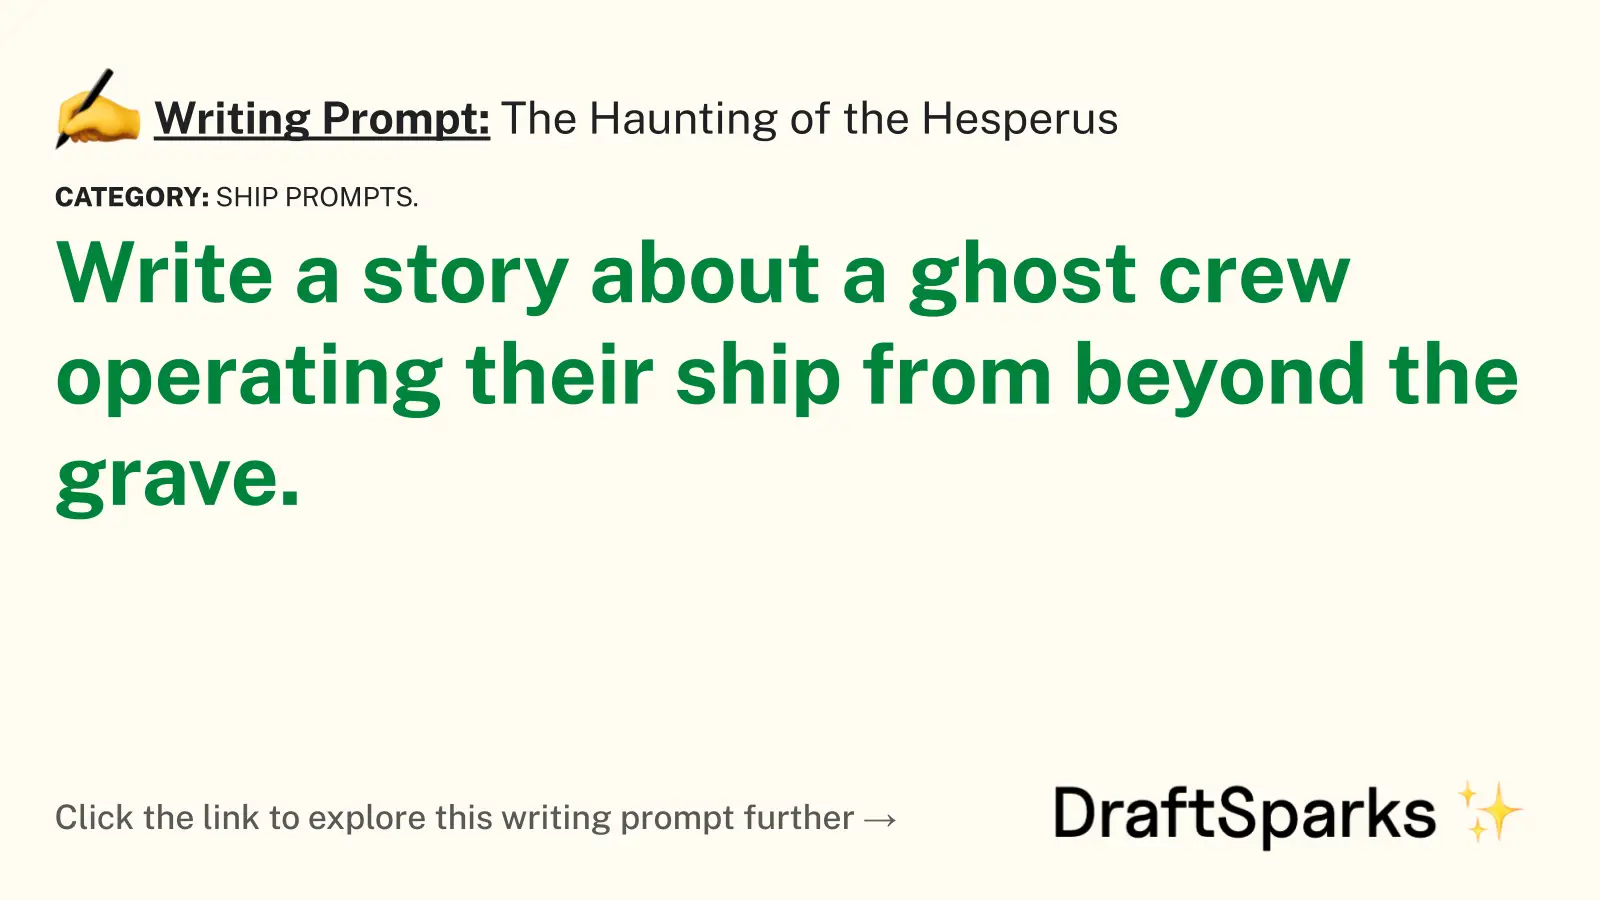 The Haunting of the Hesperus